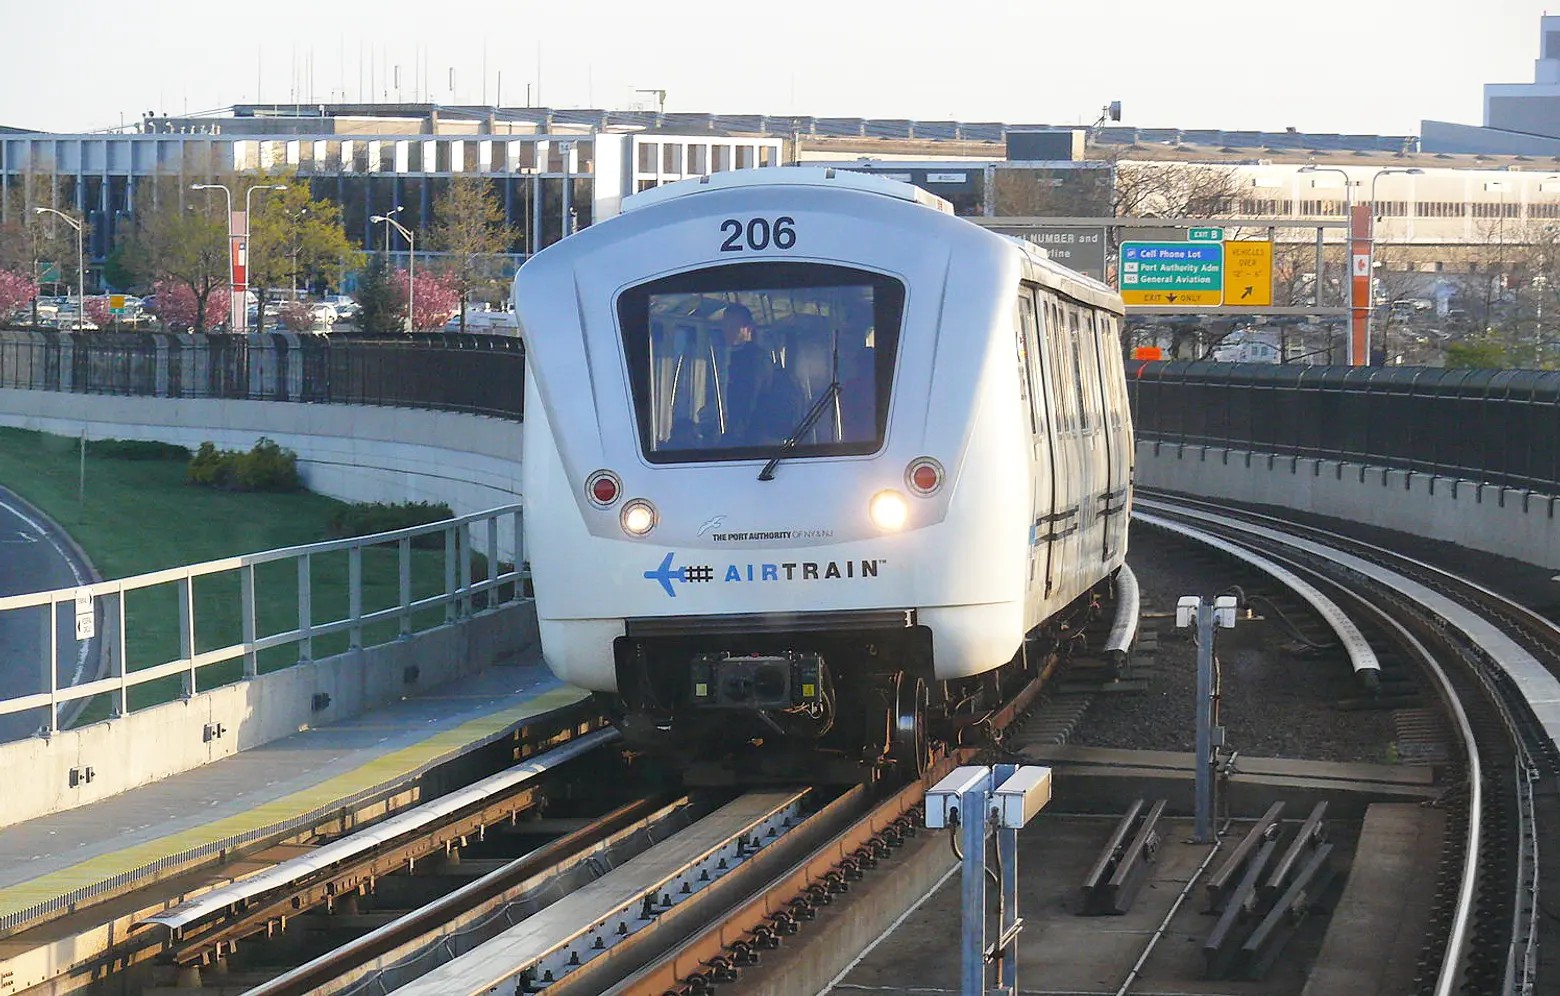 Two chances to live near the JFK AirTrain, from $1,418/month